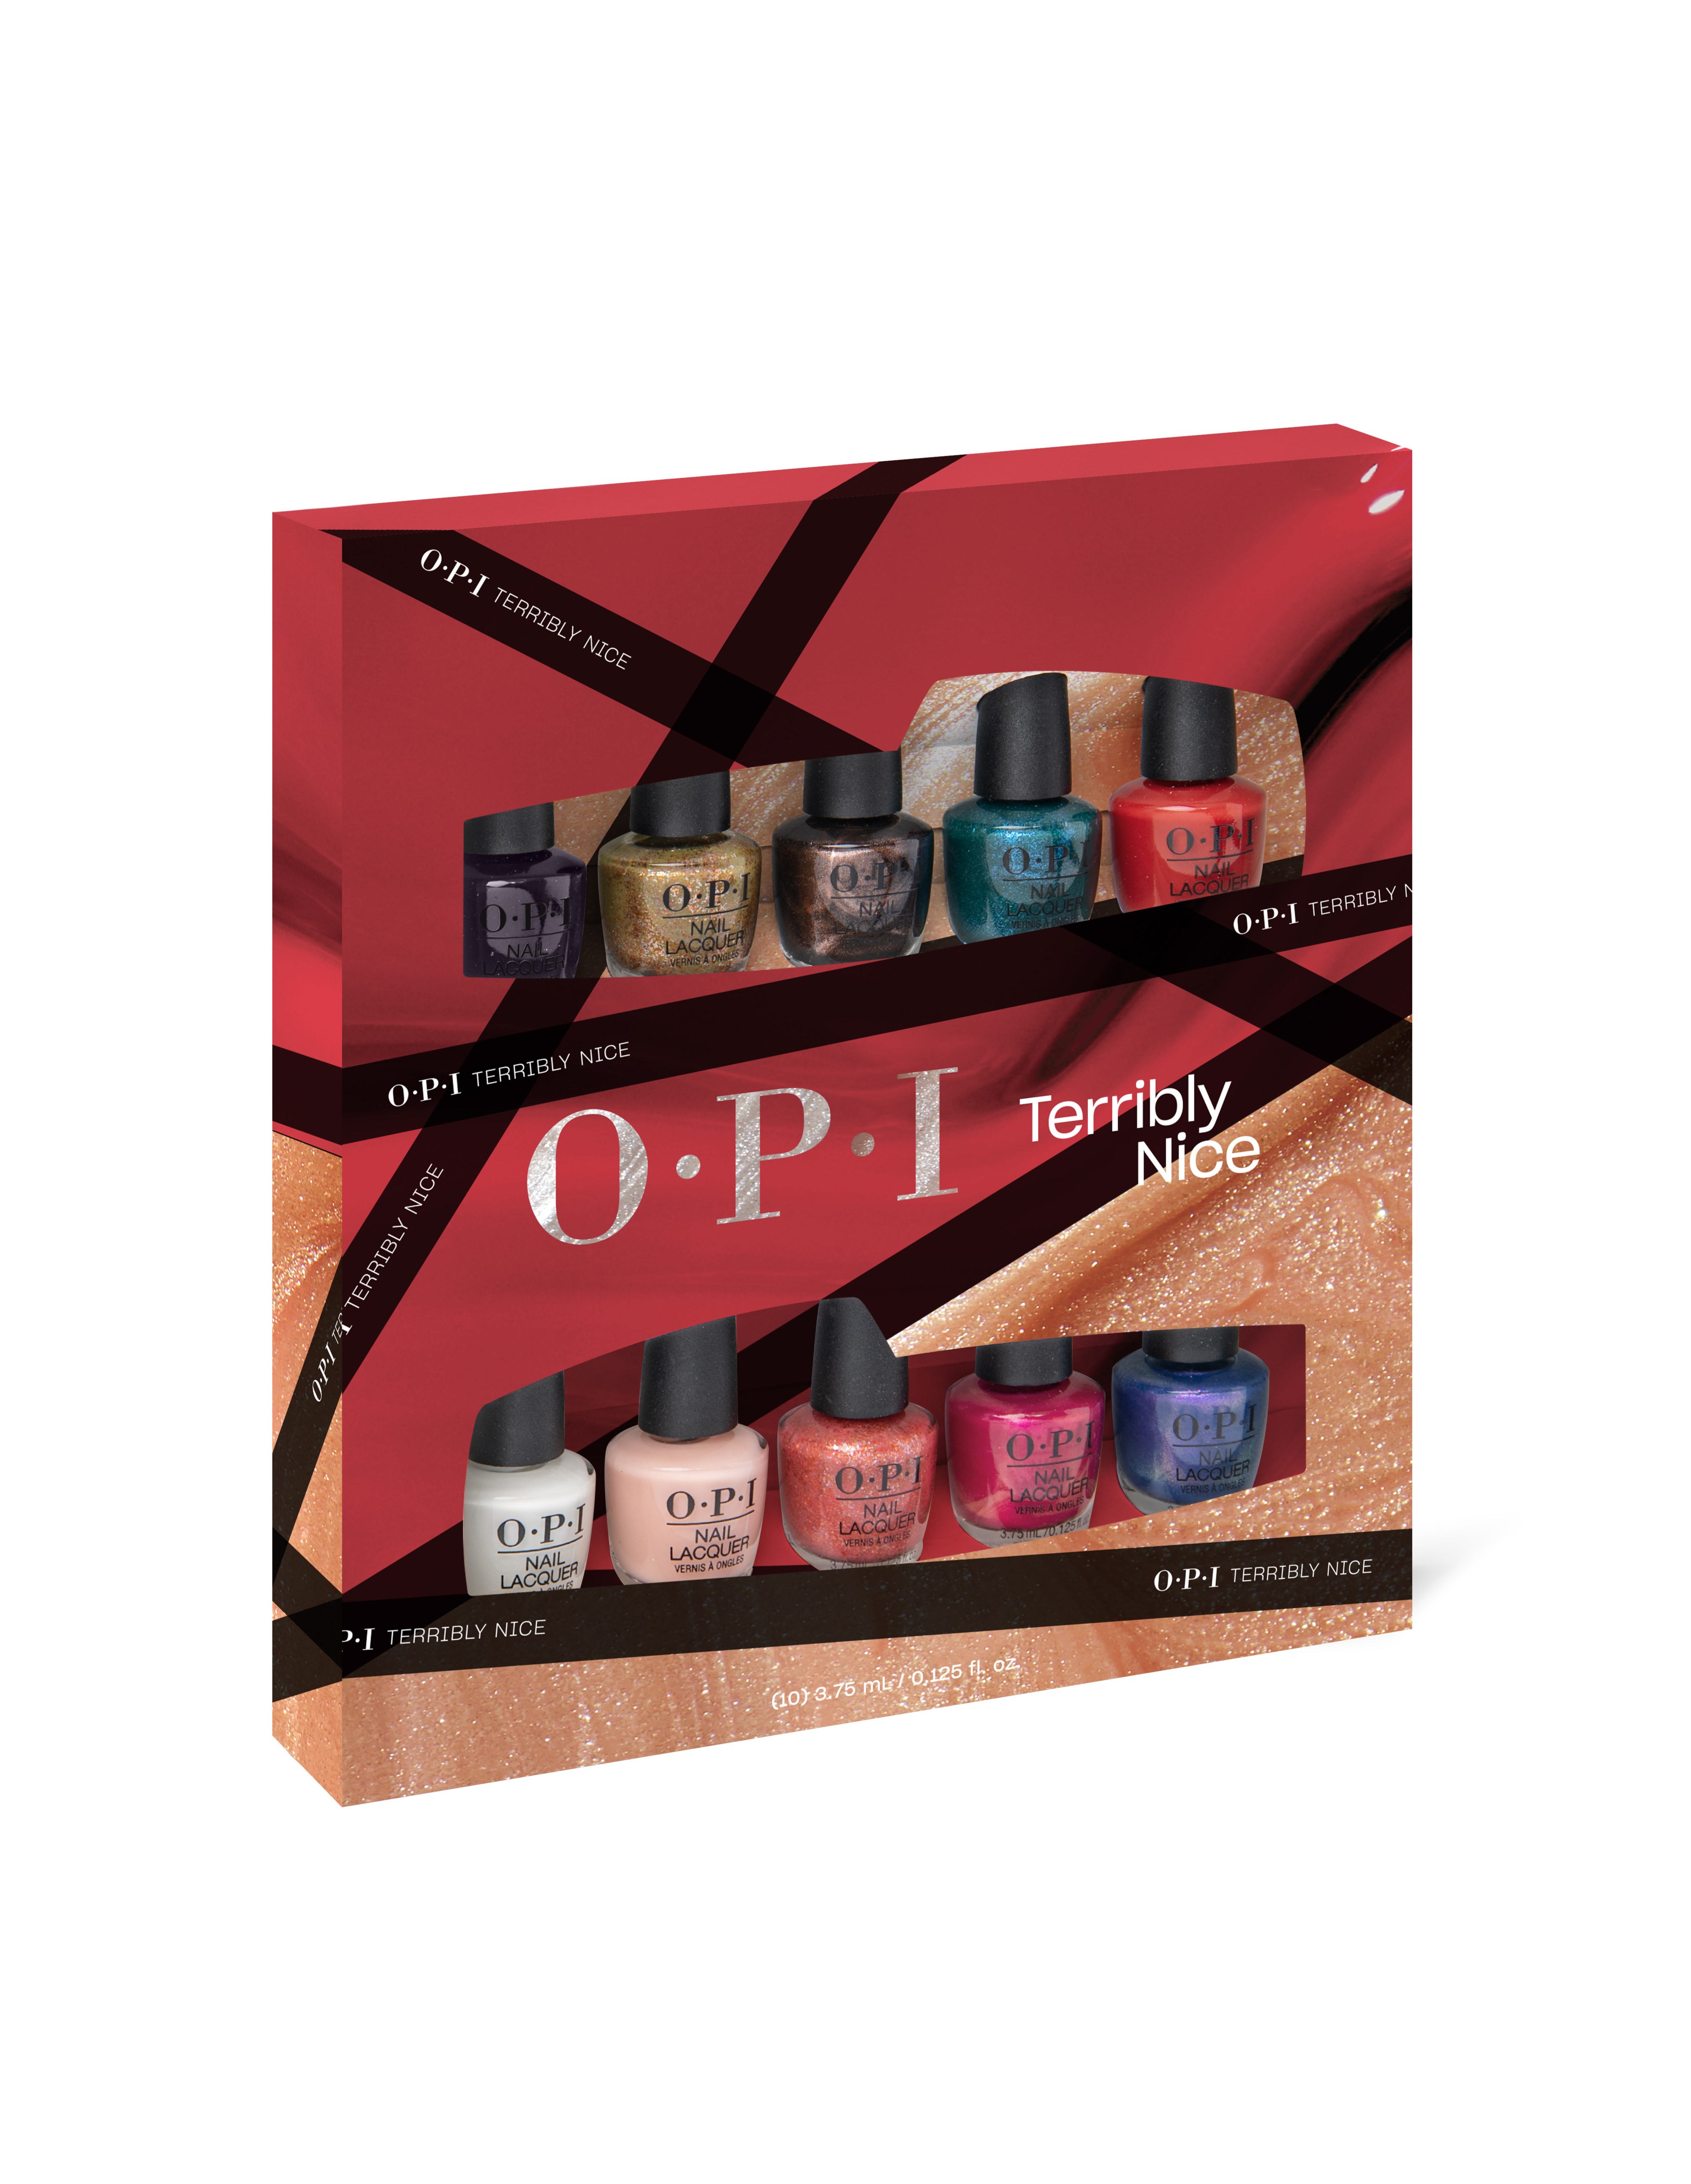 OPI Terribly Nice Nail Lacquer Mini 10 Piece Stocking Stuffer, Holiday Polish Gifts - image 2 of 4